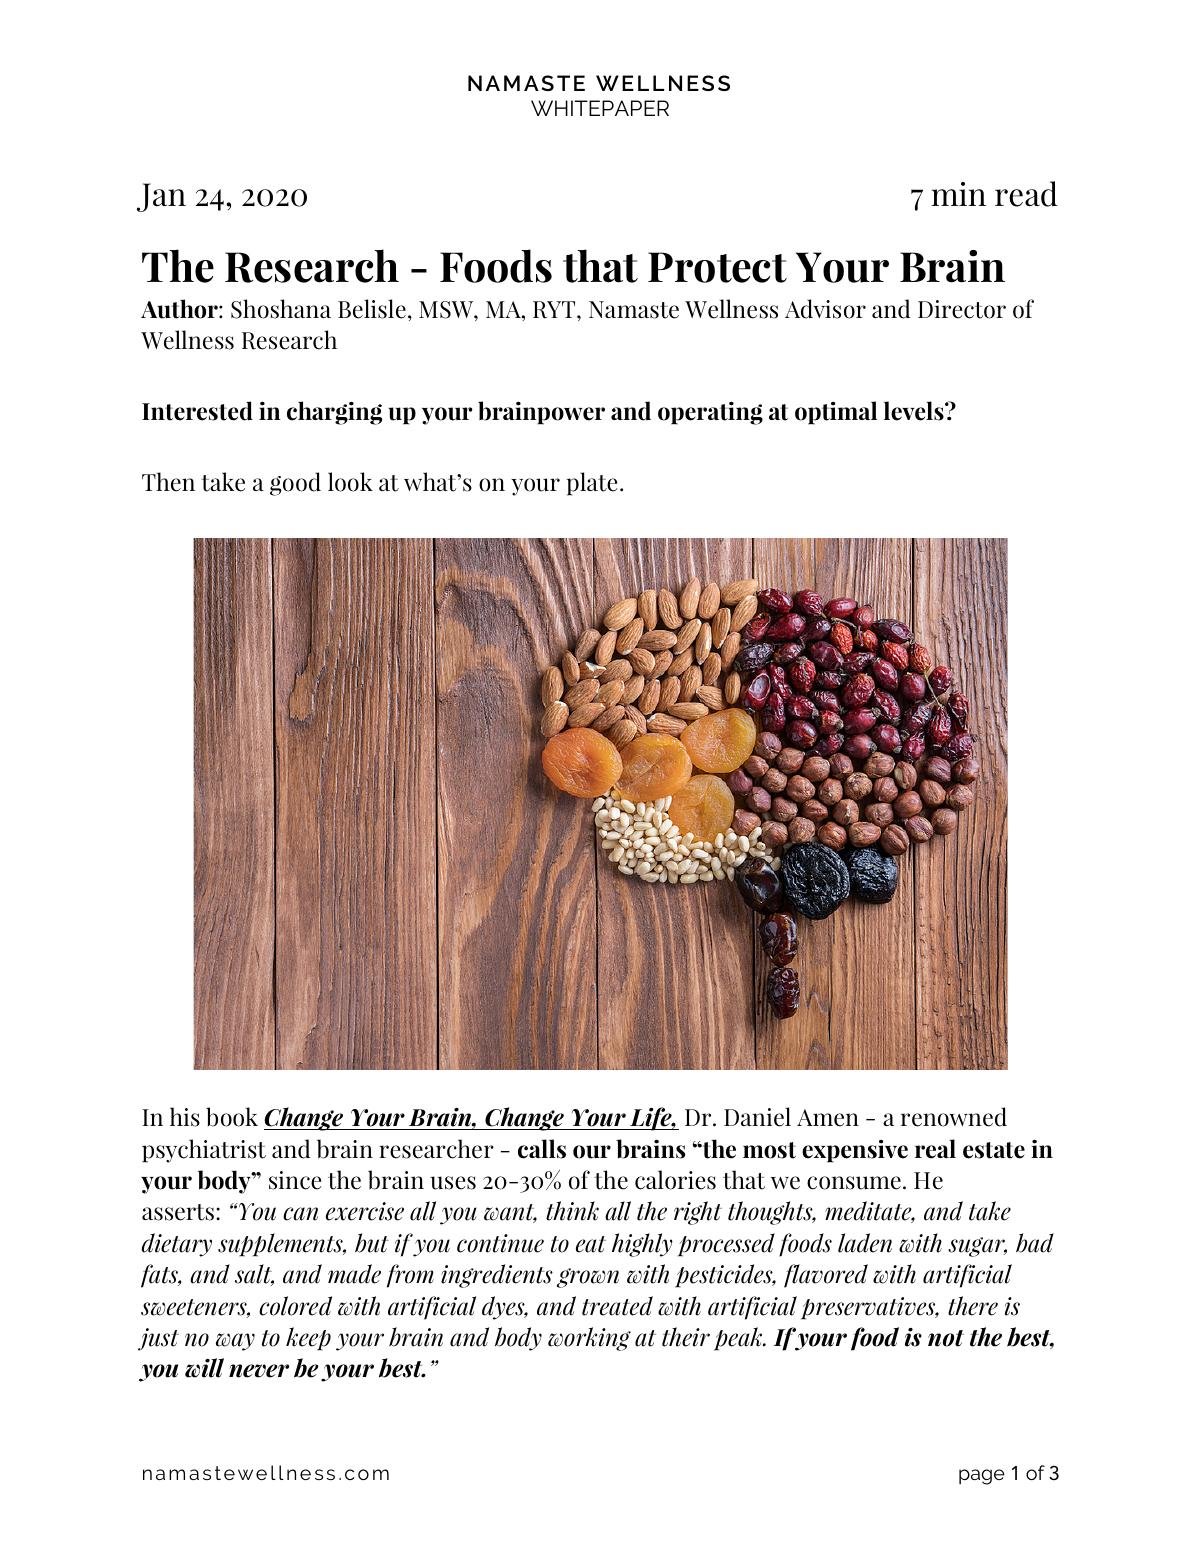 Foods that Protect Your Brain